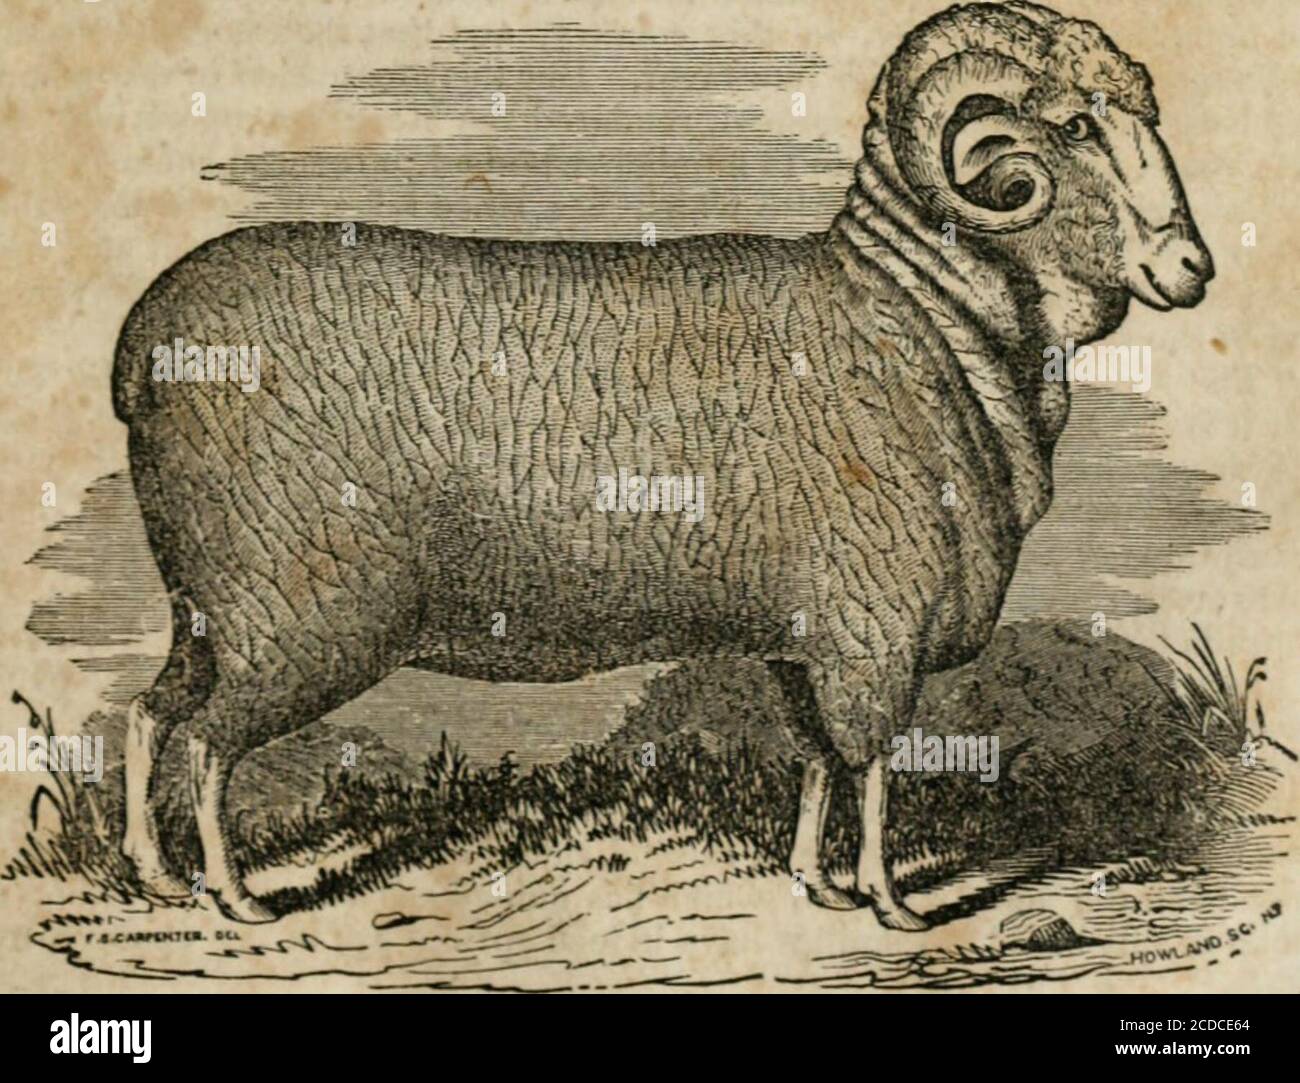 . Sheep husbandry in the South: comprising a treatise on the acclimation of sheep in the southern states, and an account of the different breeds. Also, a complete manual of breeding, summer and winter management, and of the treatment of diseases . d the possibility of carding by the Tory weed (CynoglossumeJUcinale) and Burdock (Arctium lappa) so common on new lands. The old common stock of sheep, as a distinct family, have nearly disap-peared, having been imiversally crossed, to a greater or less extent, withthe foreign breeds of later introduction. The first and second cross withtlie Merino, Stock Photo